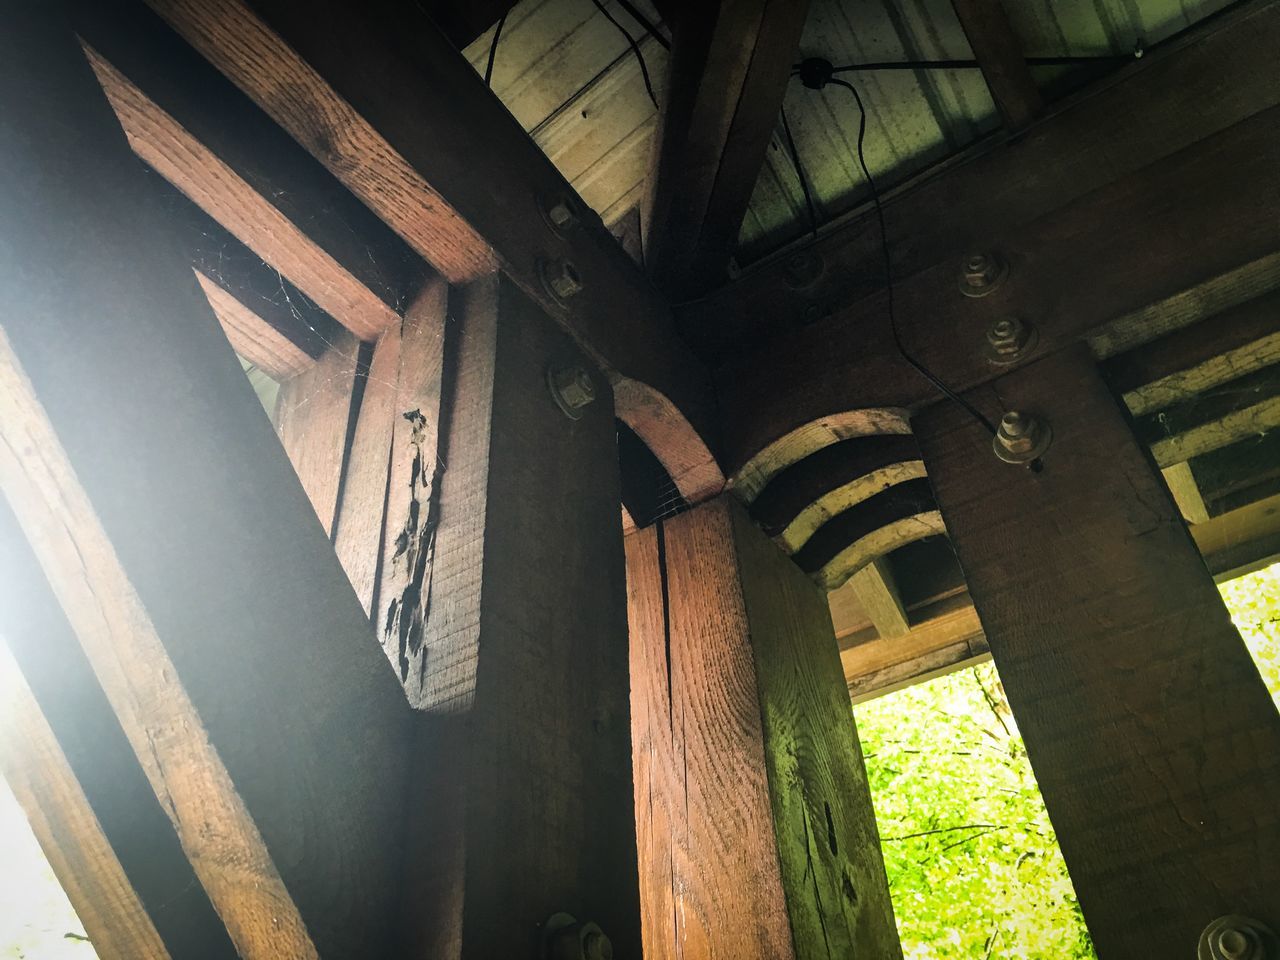 built structure, architecture, architectural column, indoors, column, low angle view, sunlight, building exterior, old, wood - material, building, no people, railing, shadow, day, window, door, abandoned, steps, staircase